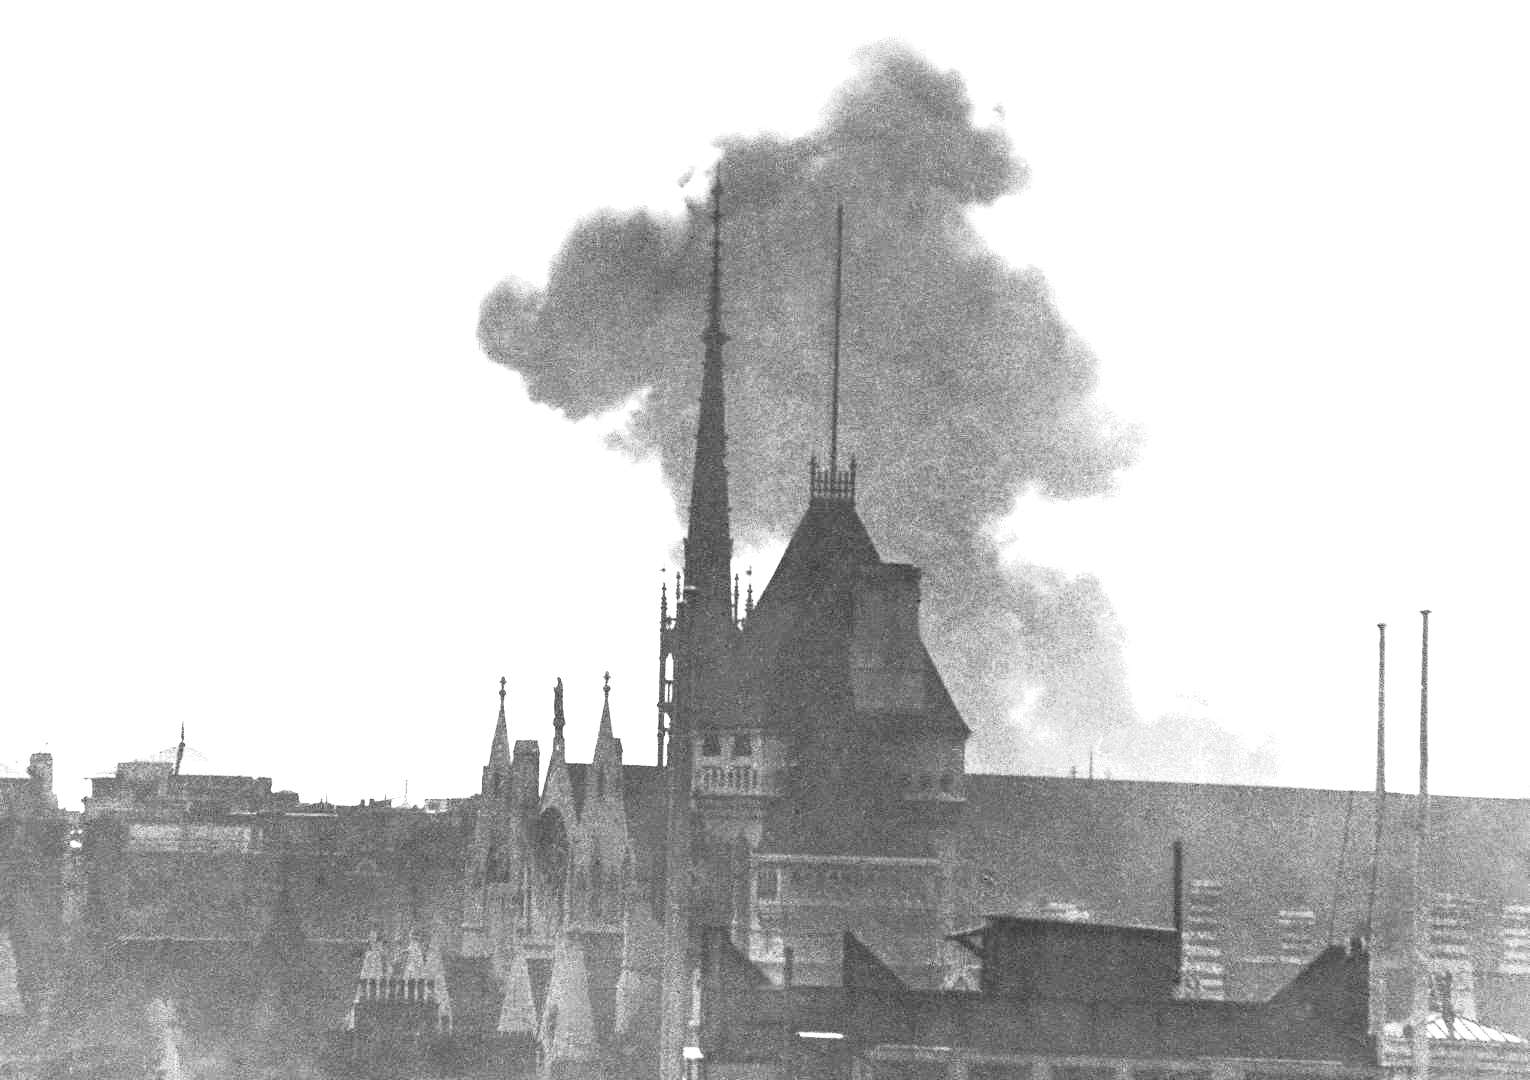 As seen from the Fleet Street rooftops, a V-1 Flying Bomb strikes near Kings Way or Drury Lane with the Law Courts towers in the foreground, London, England, United Kingdom, 3 Aug 1944. Photo 2 of 2.